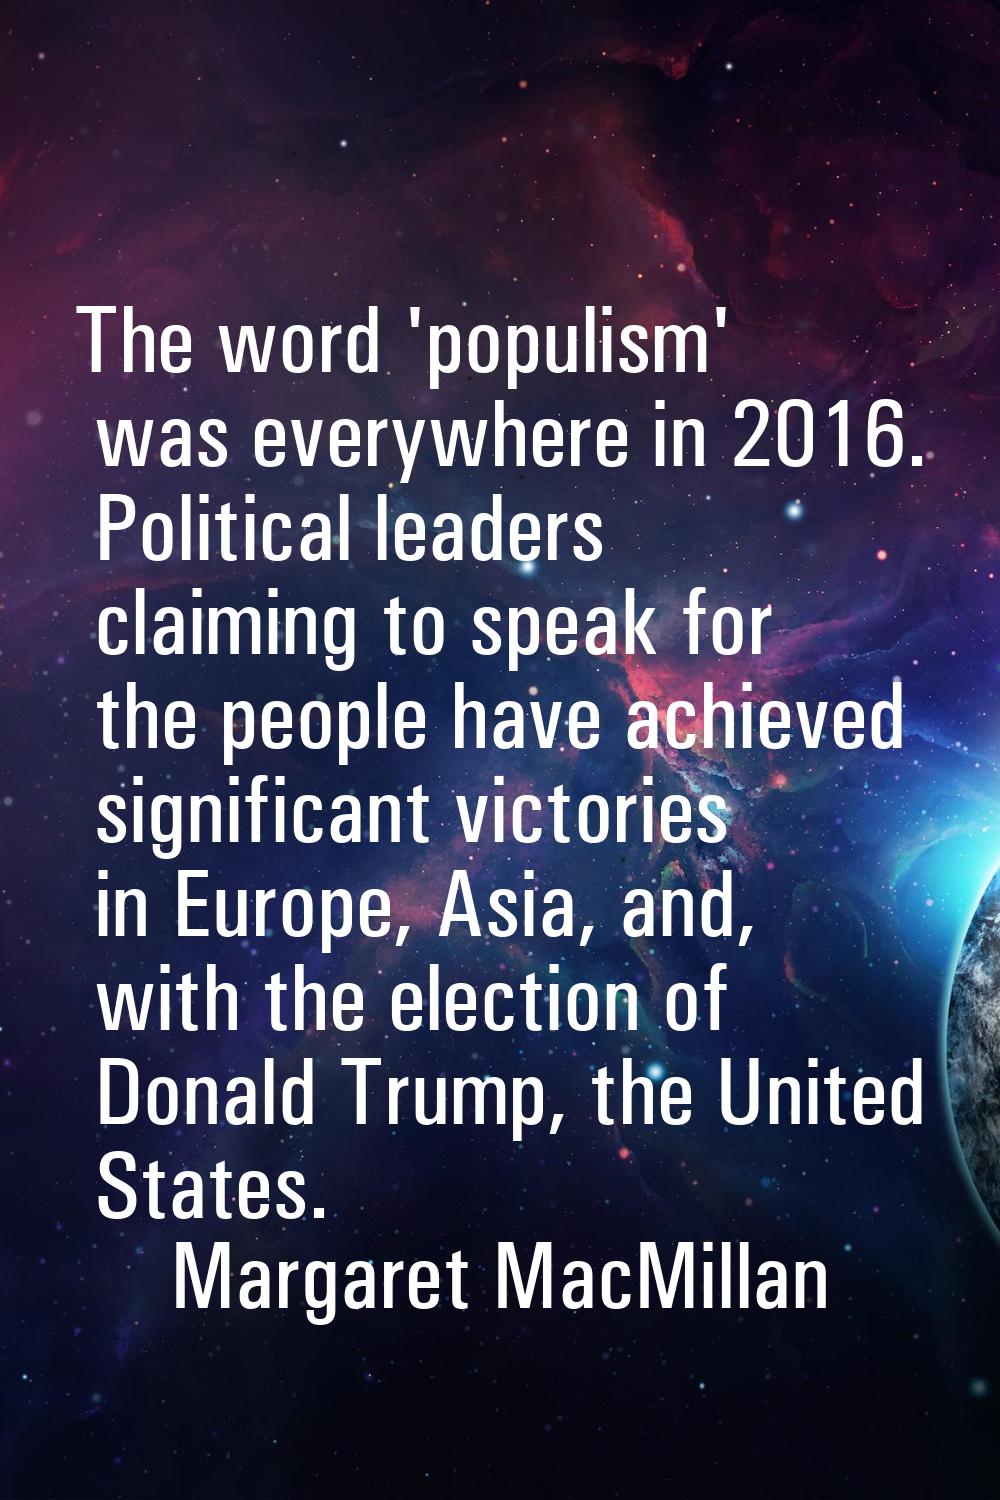 The word 'populism' was everywhere in 2016. Political leaders claiming to speak for the people have